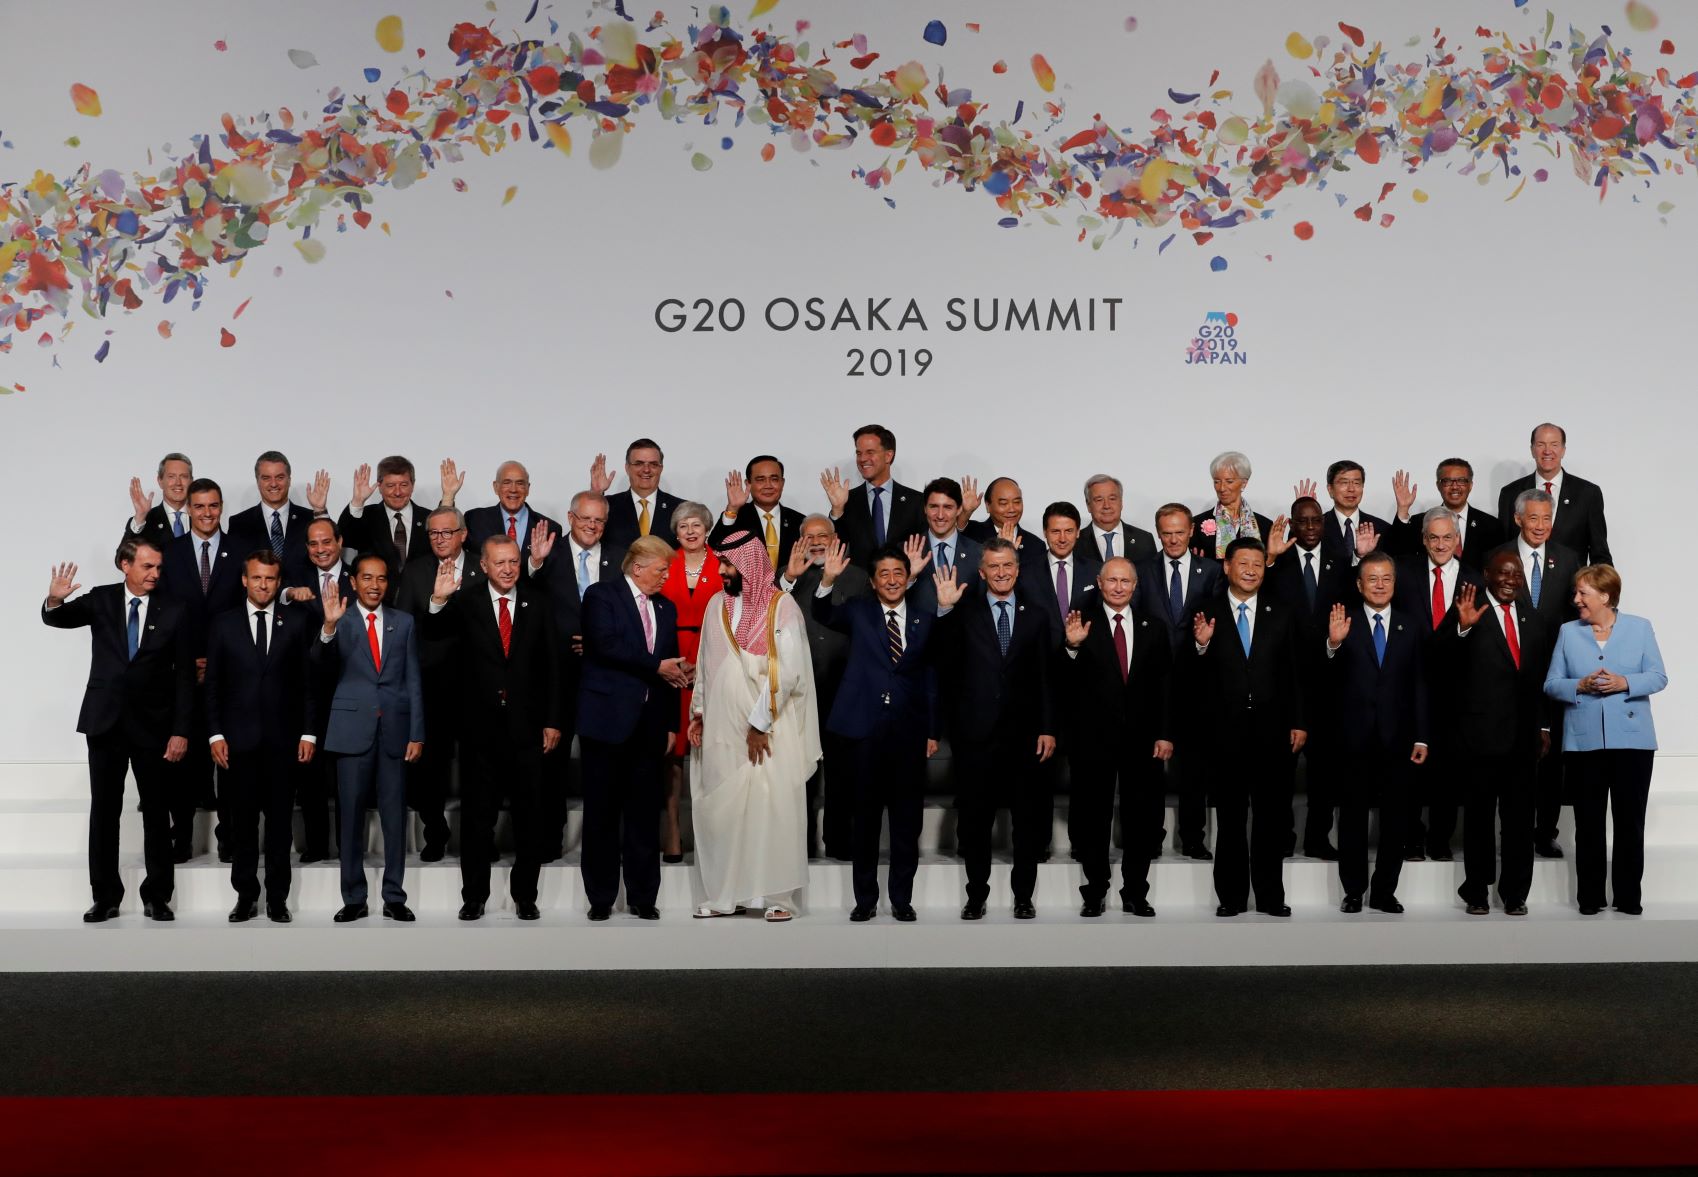 World leaders at the G20 summit in Osaka